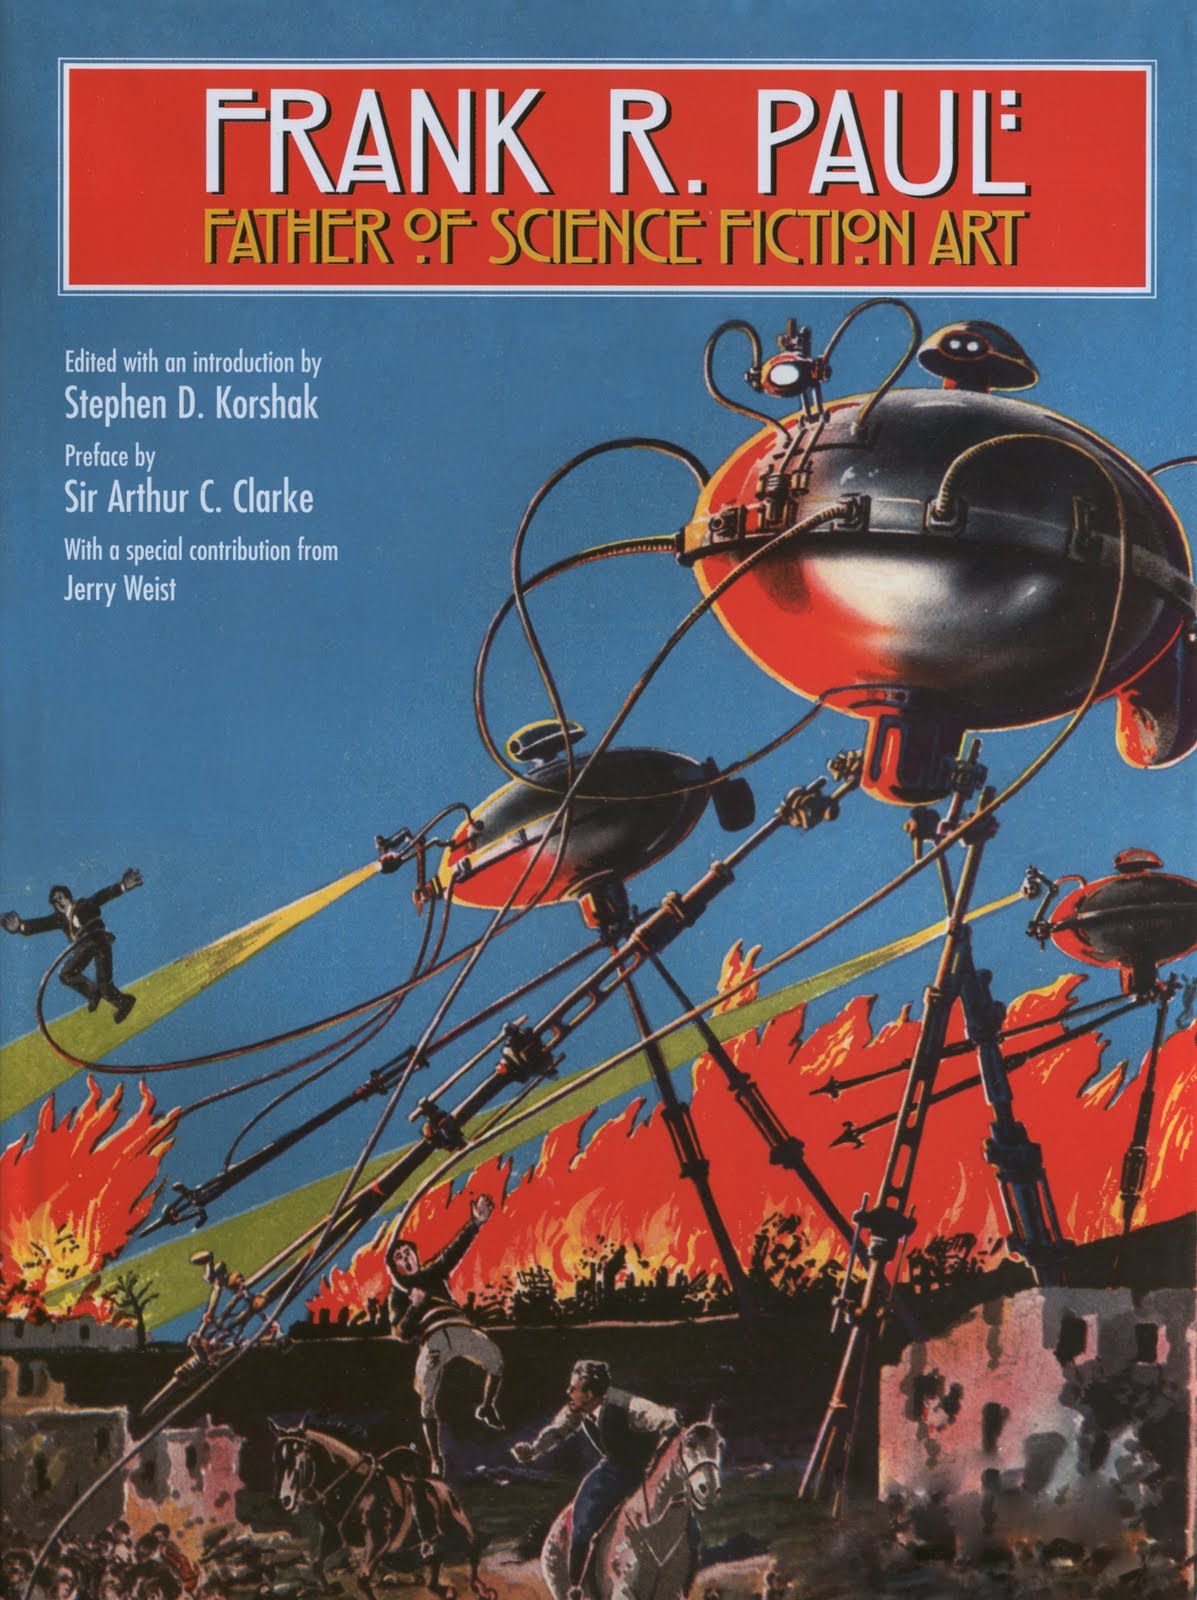 who is the father of science fiction